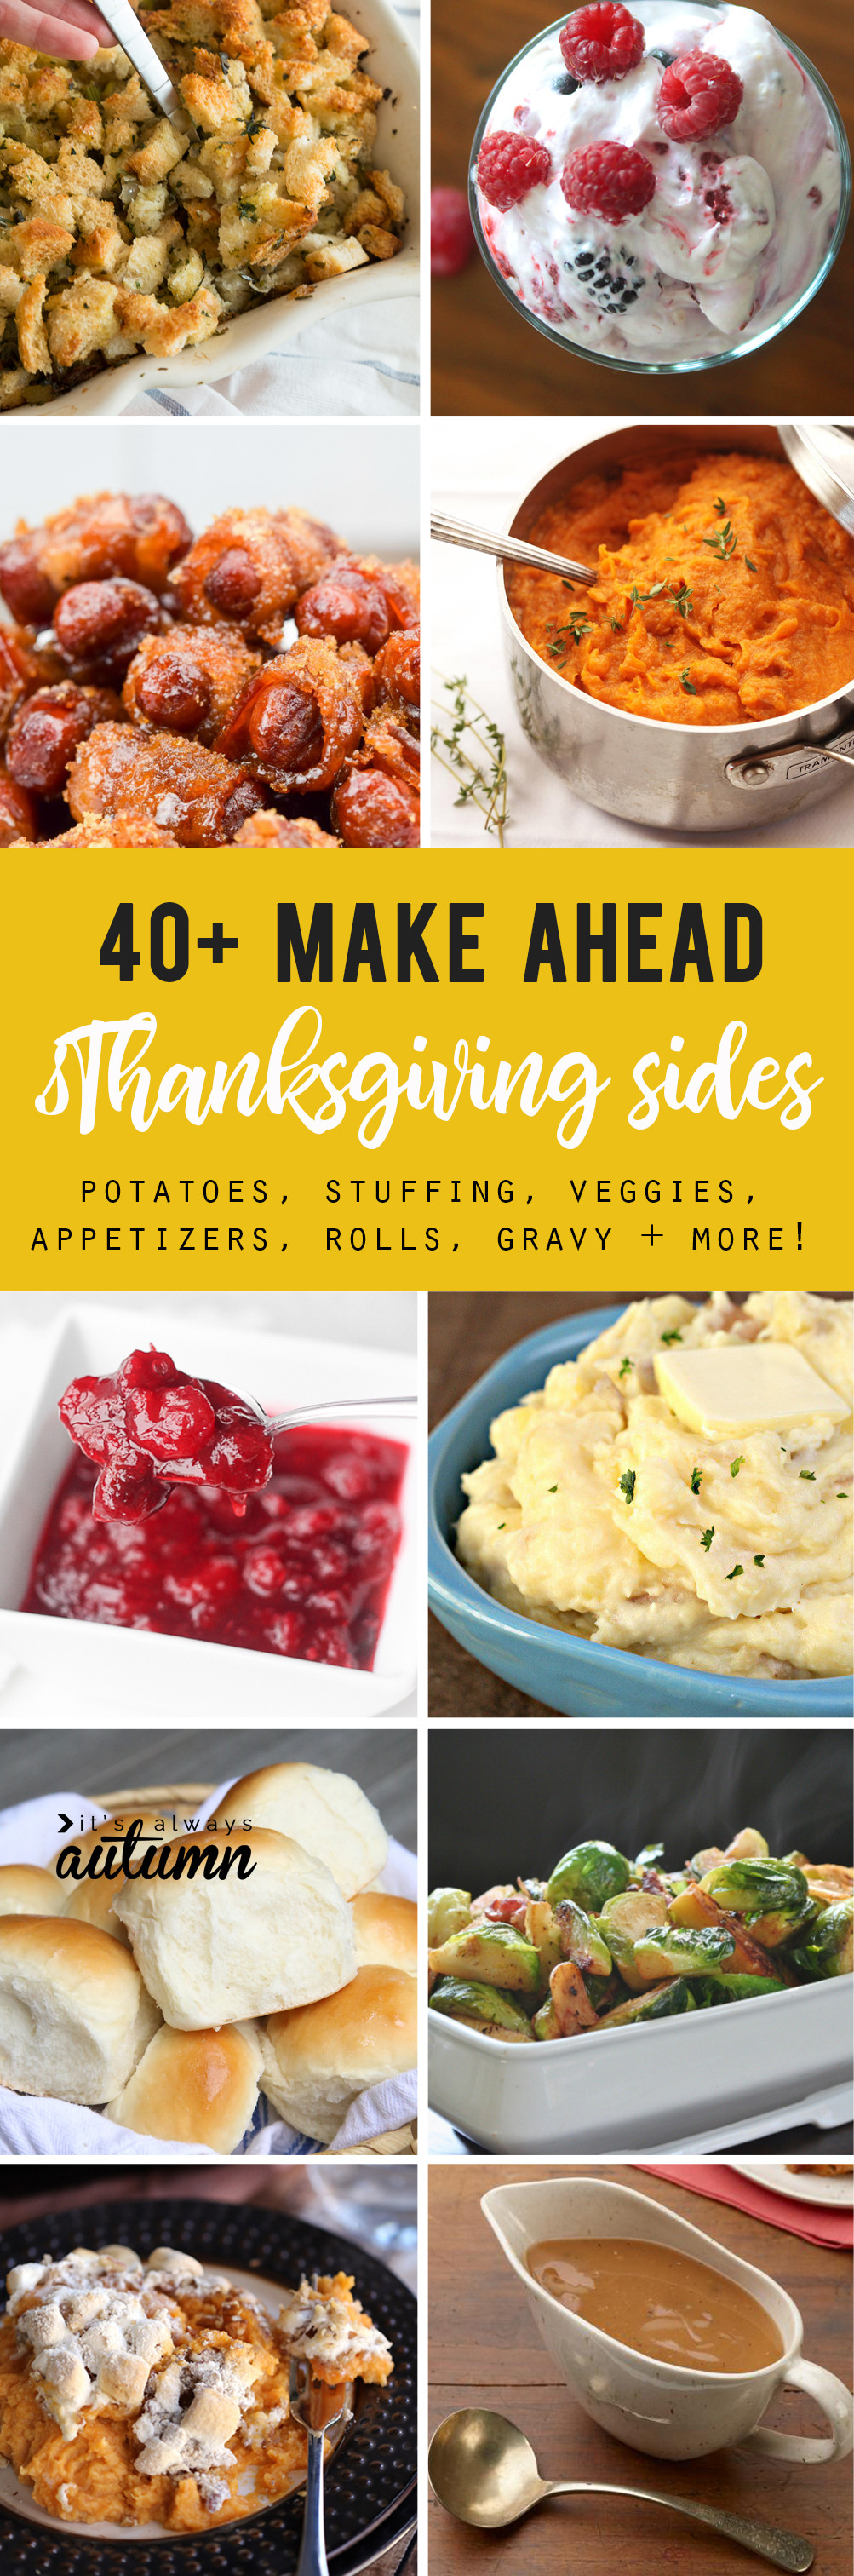 Thanksgiving Vegetables Make Ahead
 THANKSGIVING SIDE DISHES YOU CAN MAKE IN ADVANCE